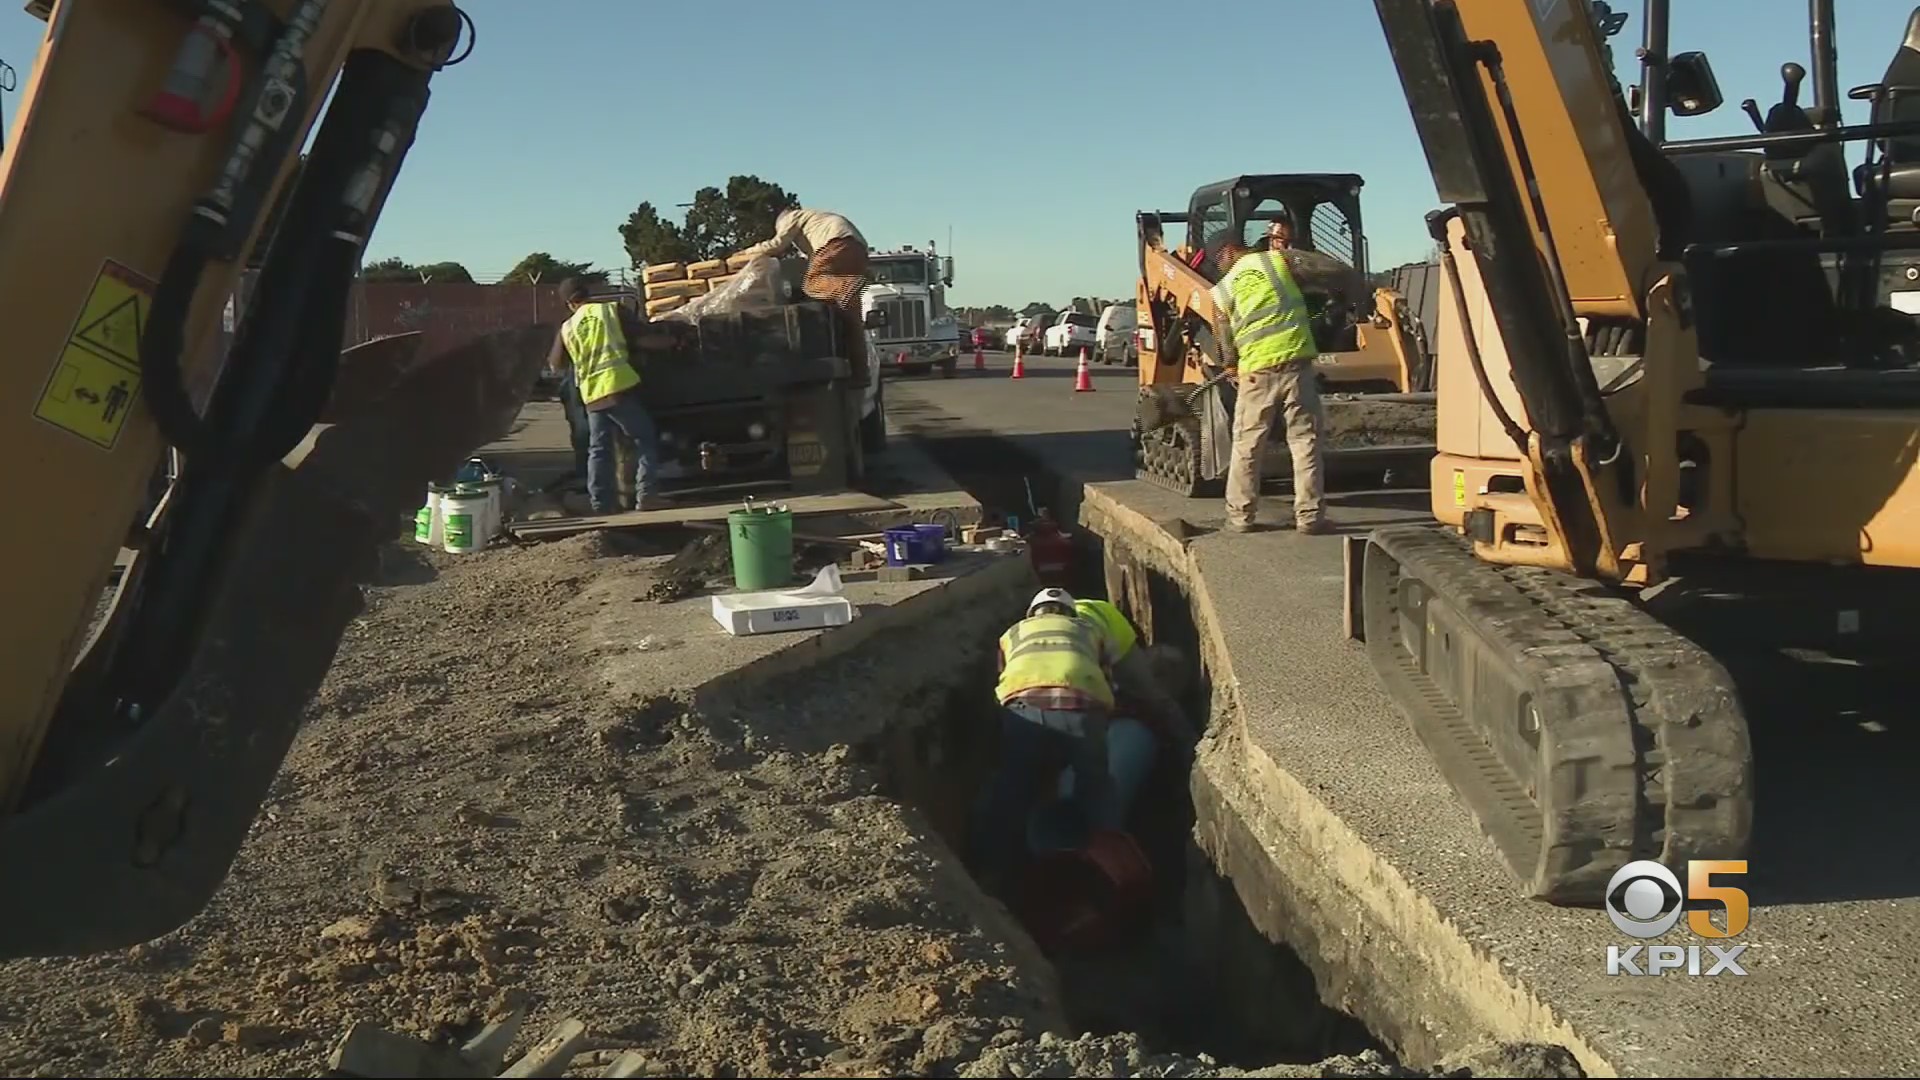 Big Wave, a community for special needs adults, being built in Half Moon Bay. (CBS)